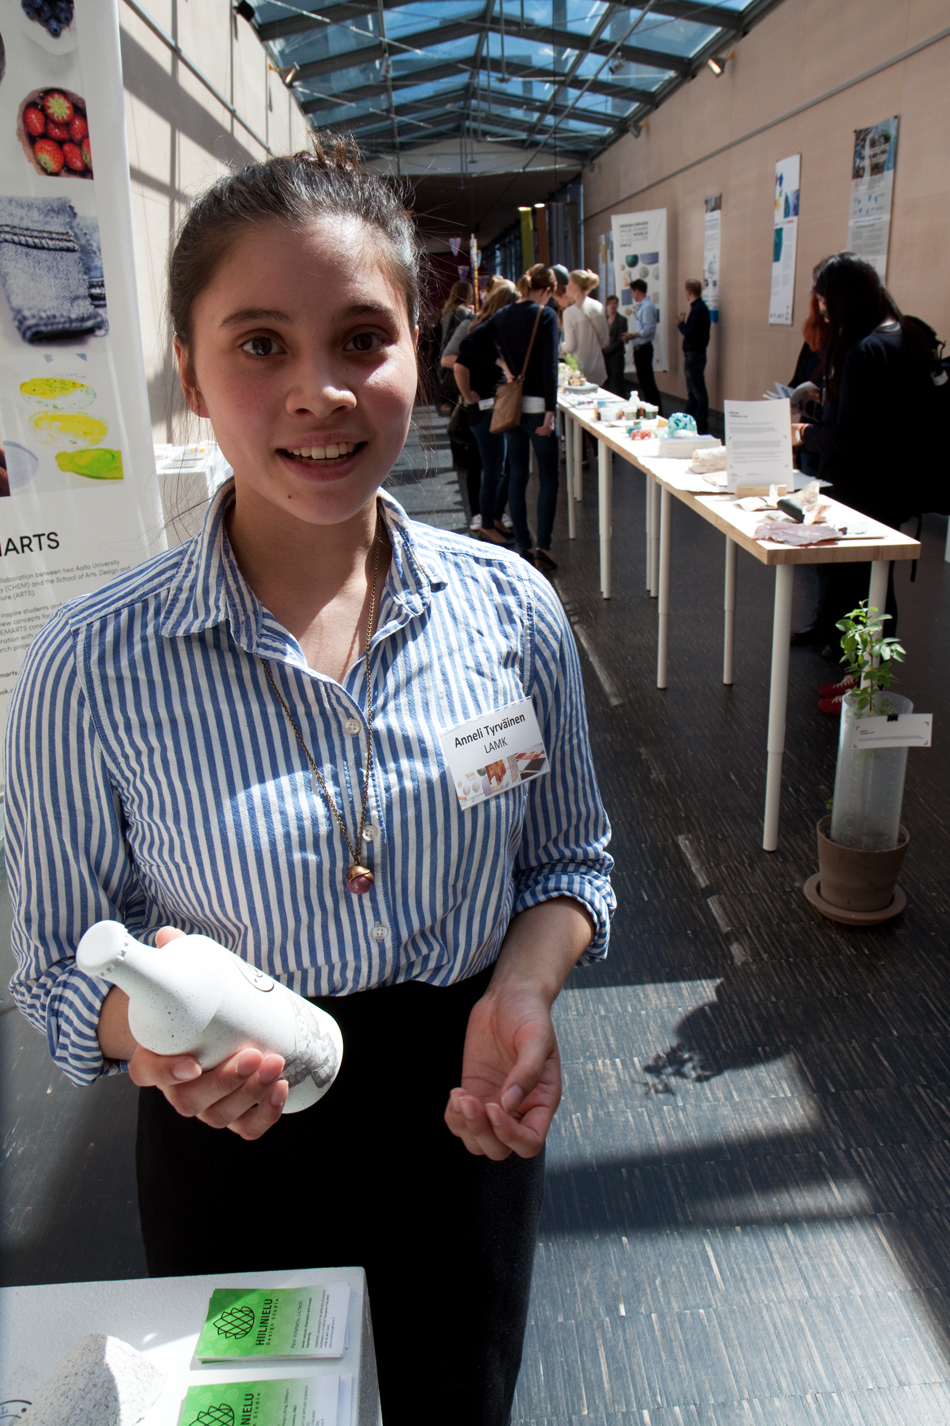 Ms. Anneli Tyrväinen, student of packaging and brand design at the Lahti University of Applied Sciences, presented the beer bottle of the future at the Designing Cellulose exhibition. Photo: Anna Kauppi